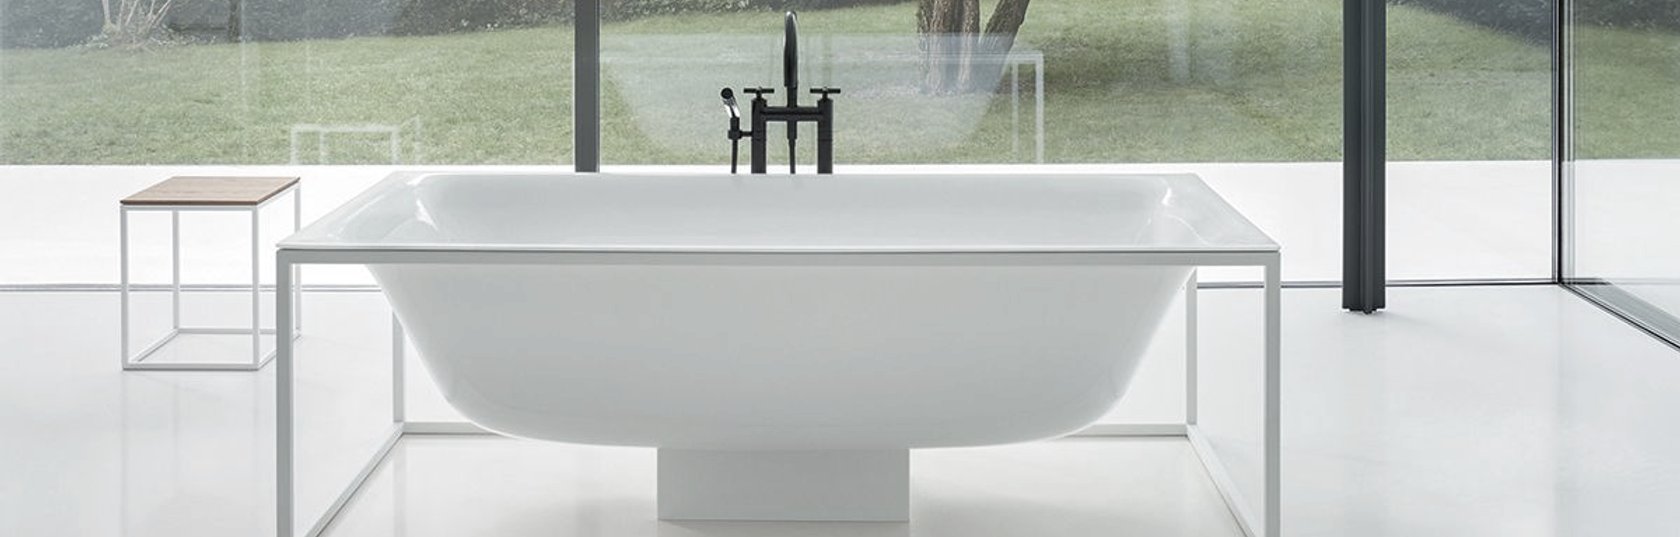 Ideas and Inspiration for a Sustainable Bathroom